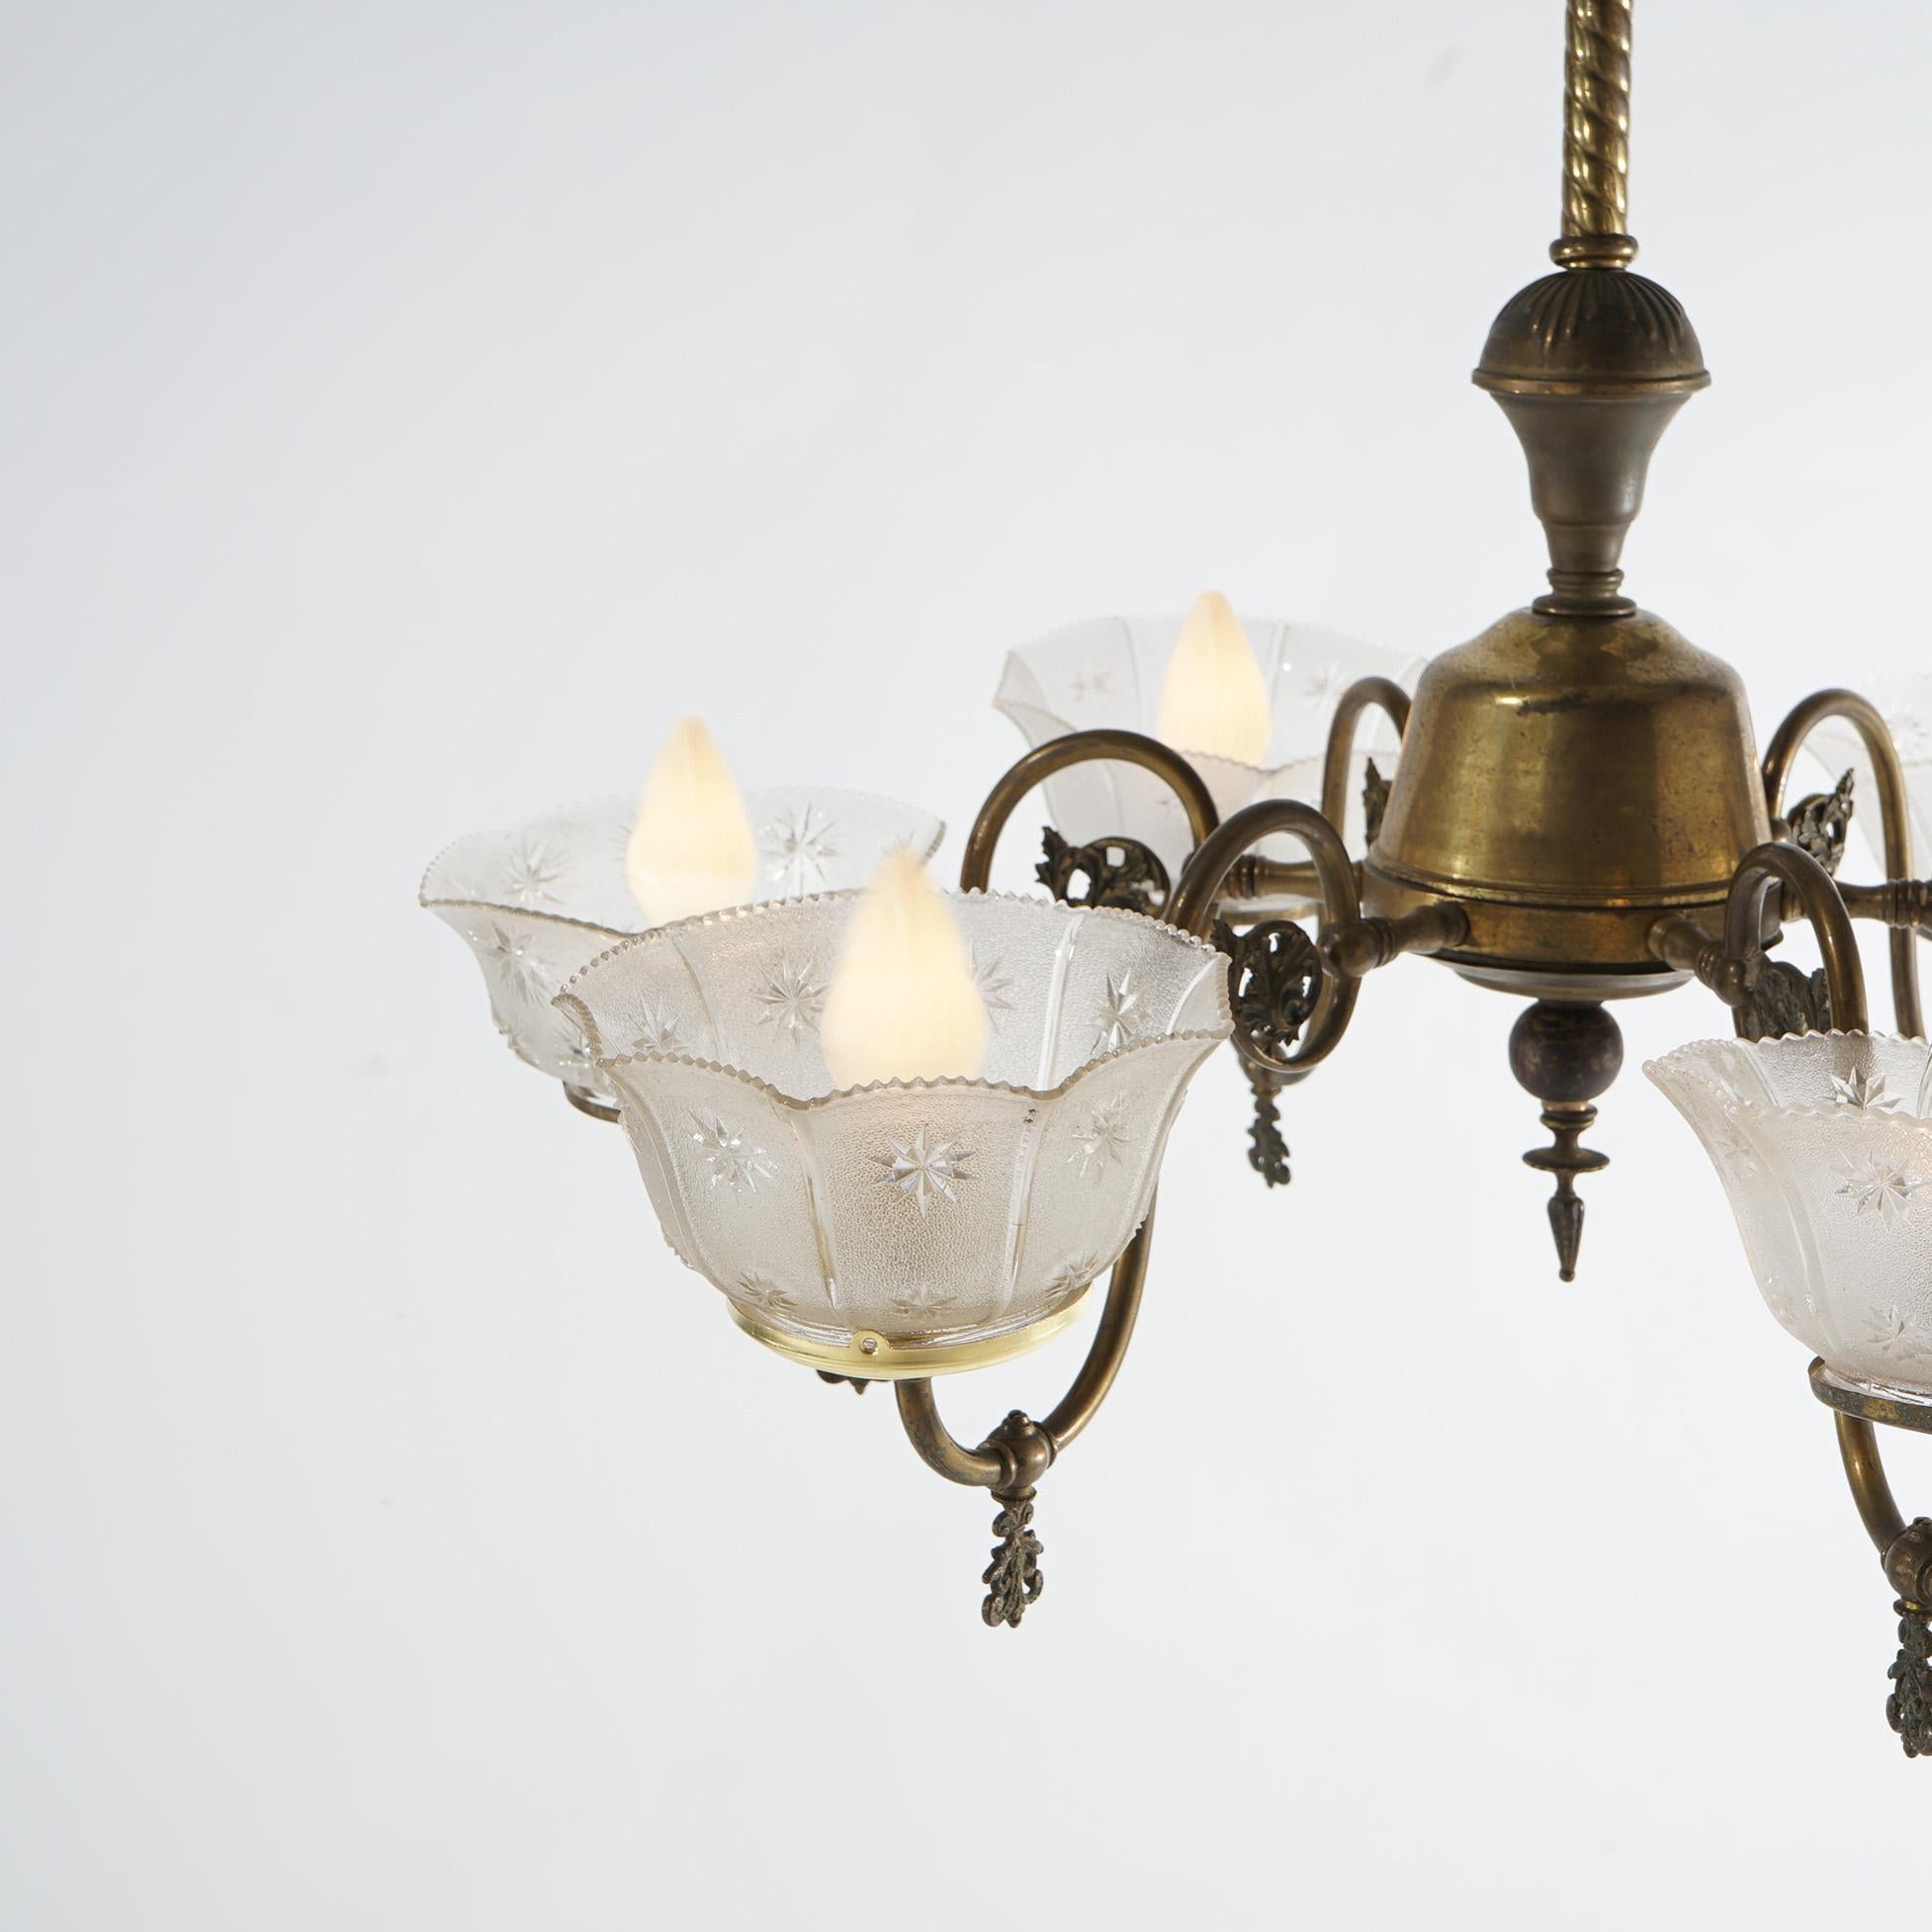 Antique Six Arm Brass Gas Chandelier with Glass Shades, Electrified, Circa 1890 8